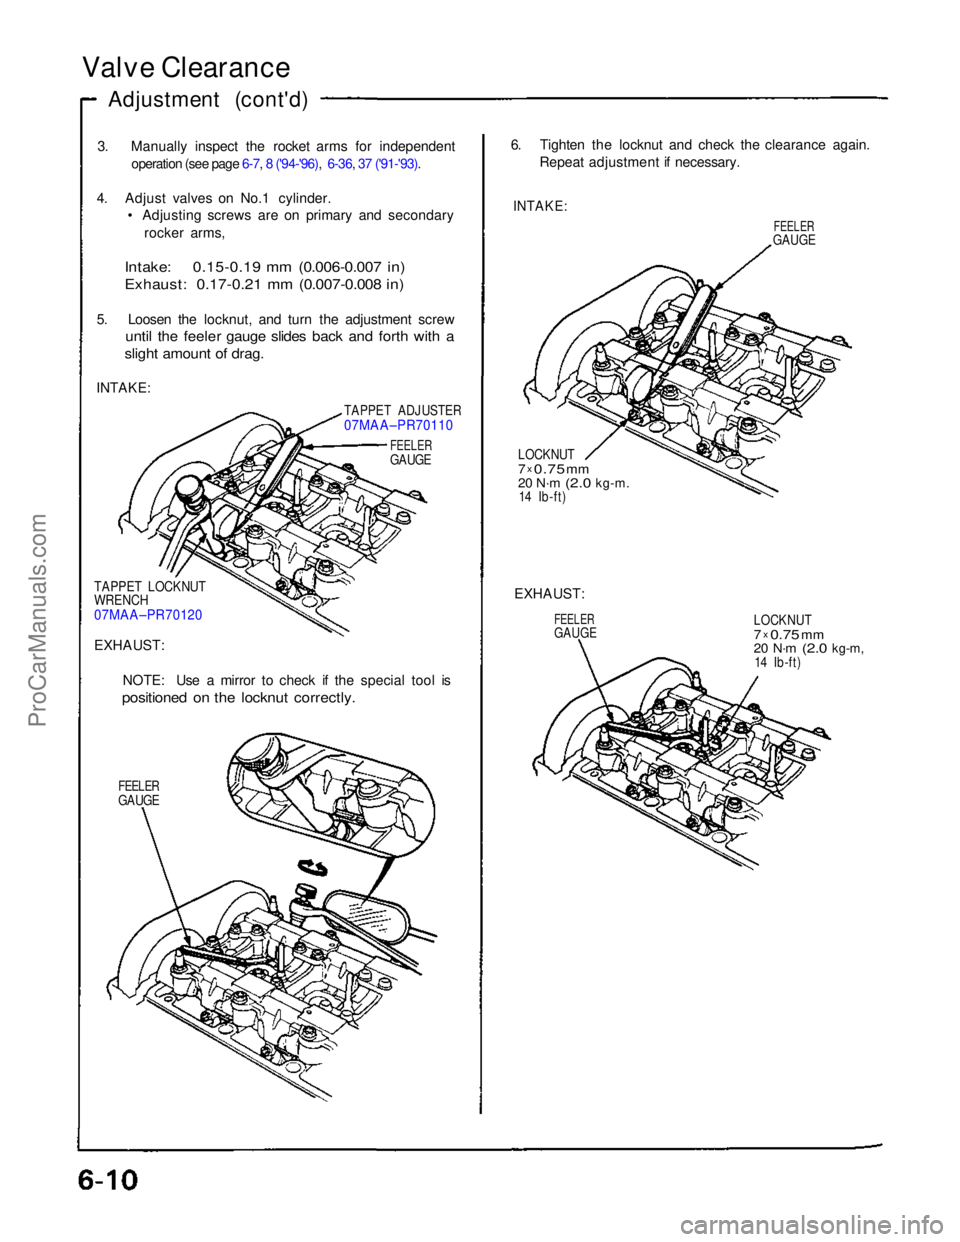 ACURA NSX 1991  Service Repair Manual Valve Clearance
Adjustment (cont'd)
3. Manually inspect the rocket arms for independentoperation (see page 6-7, 8 ('94-'96),  6-36, 37 ('91-'93).
 4. Adjust valves on No.1 cylinder